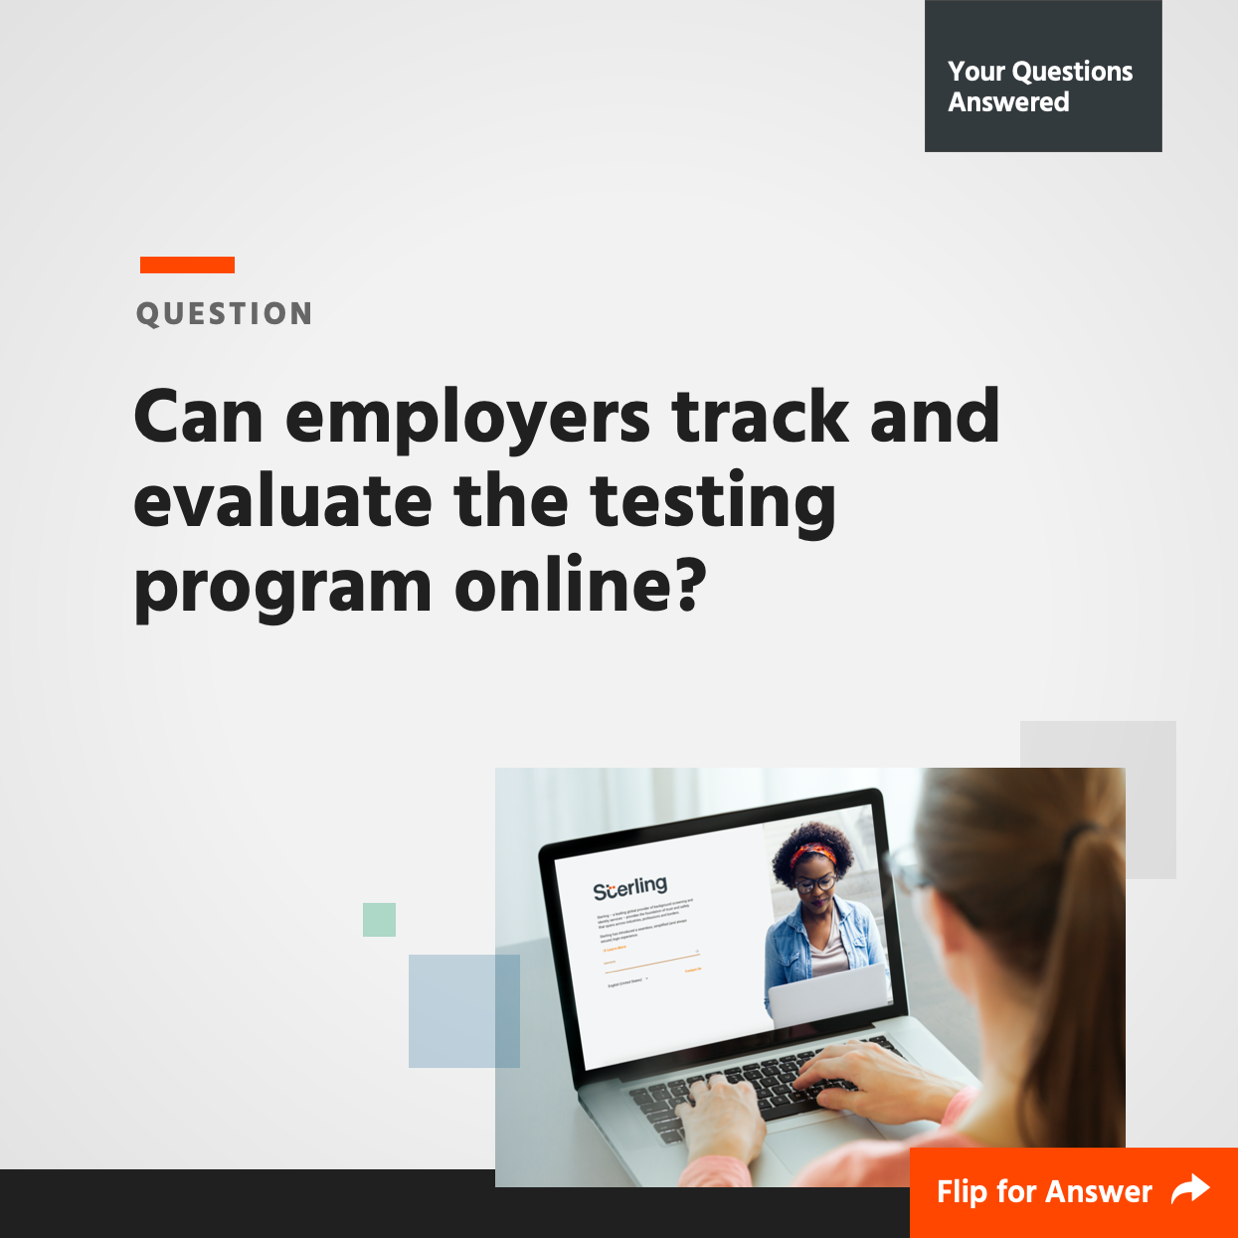 Can employers track and evaluate the testing program online?